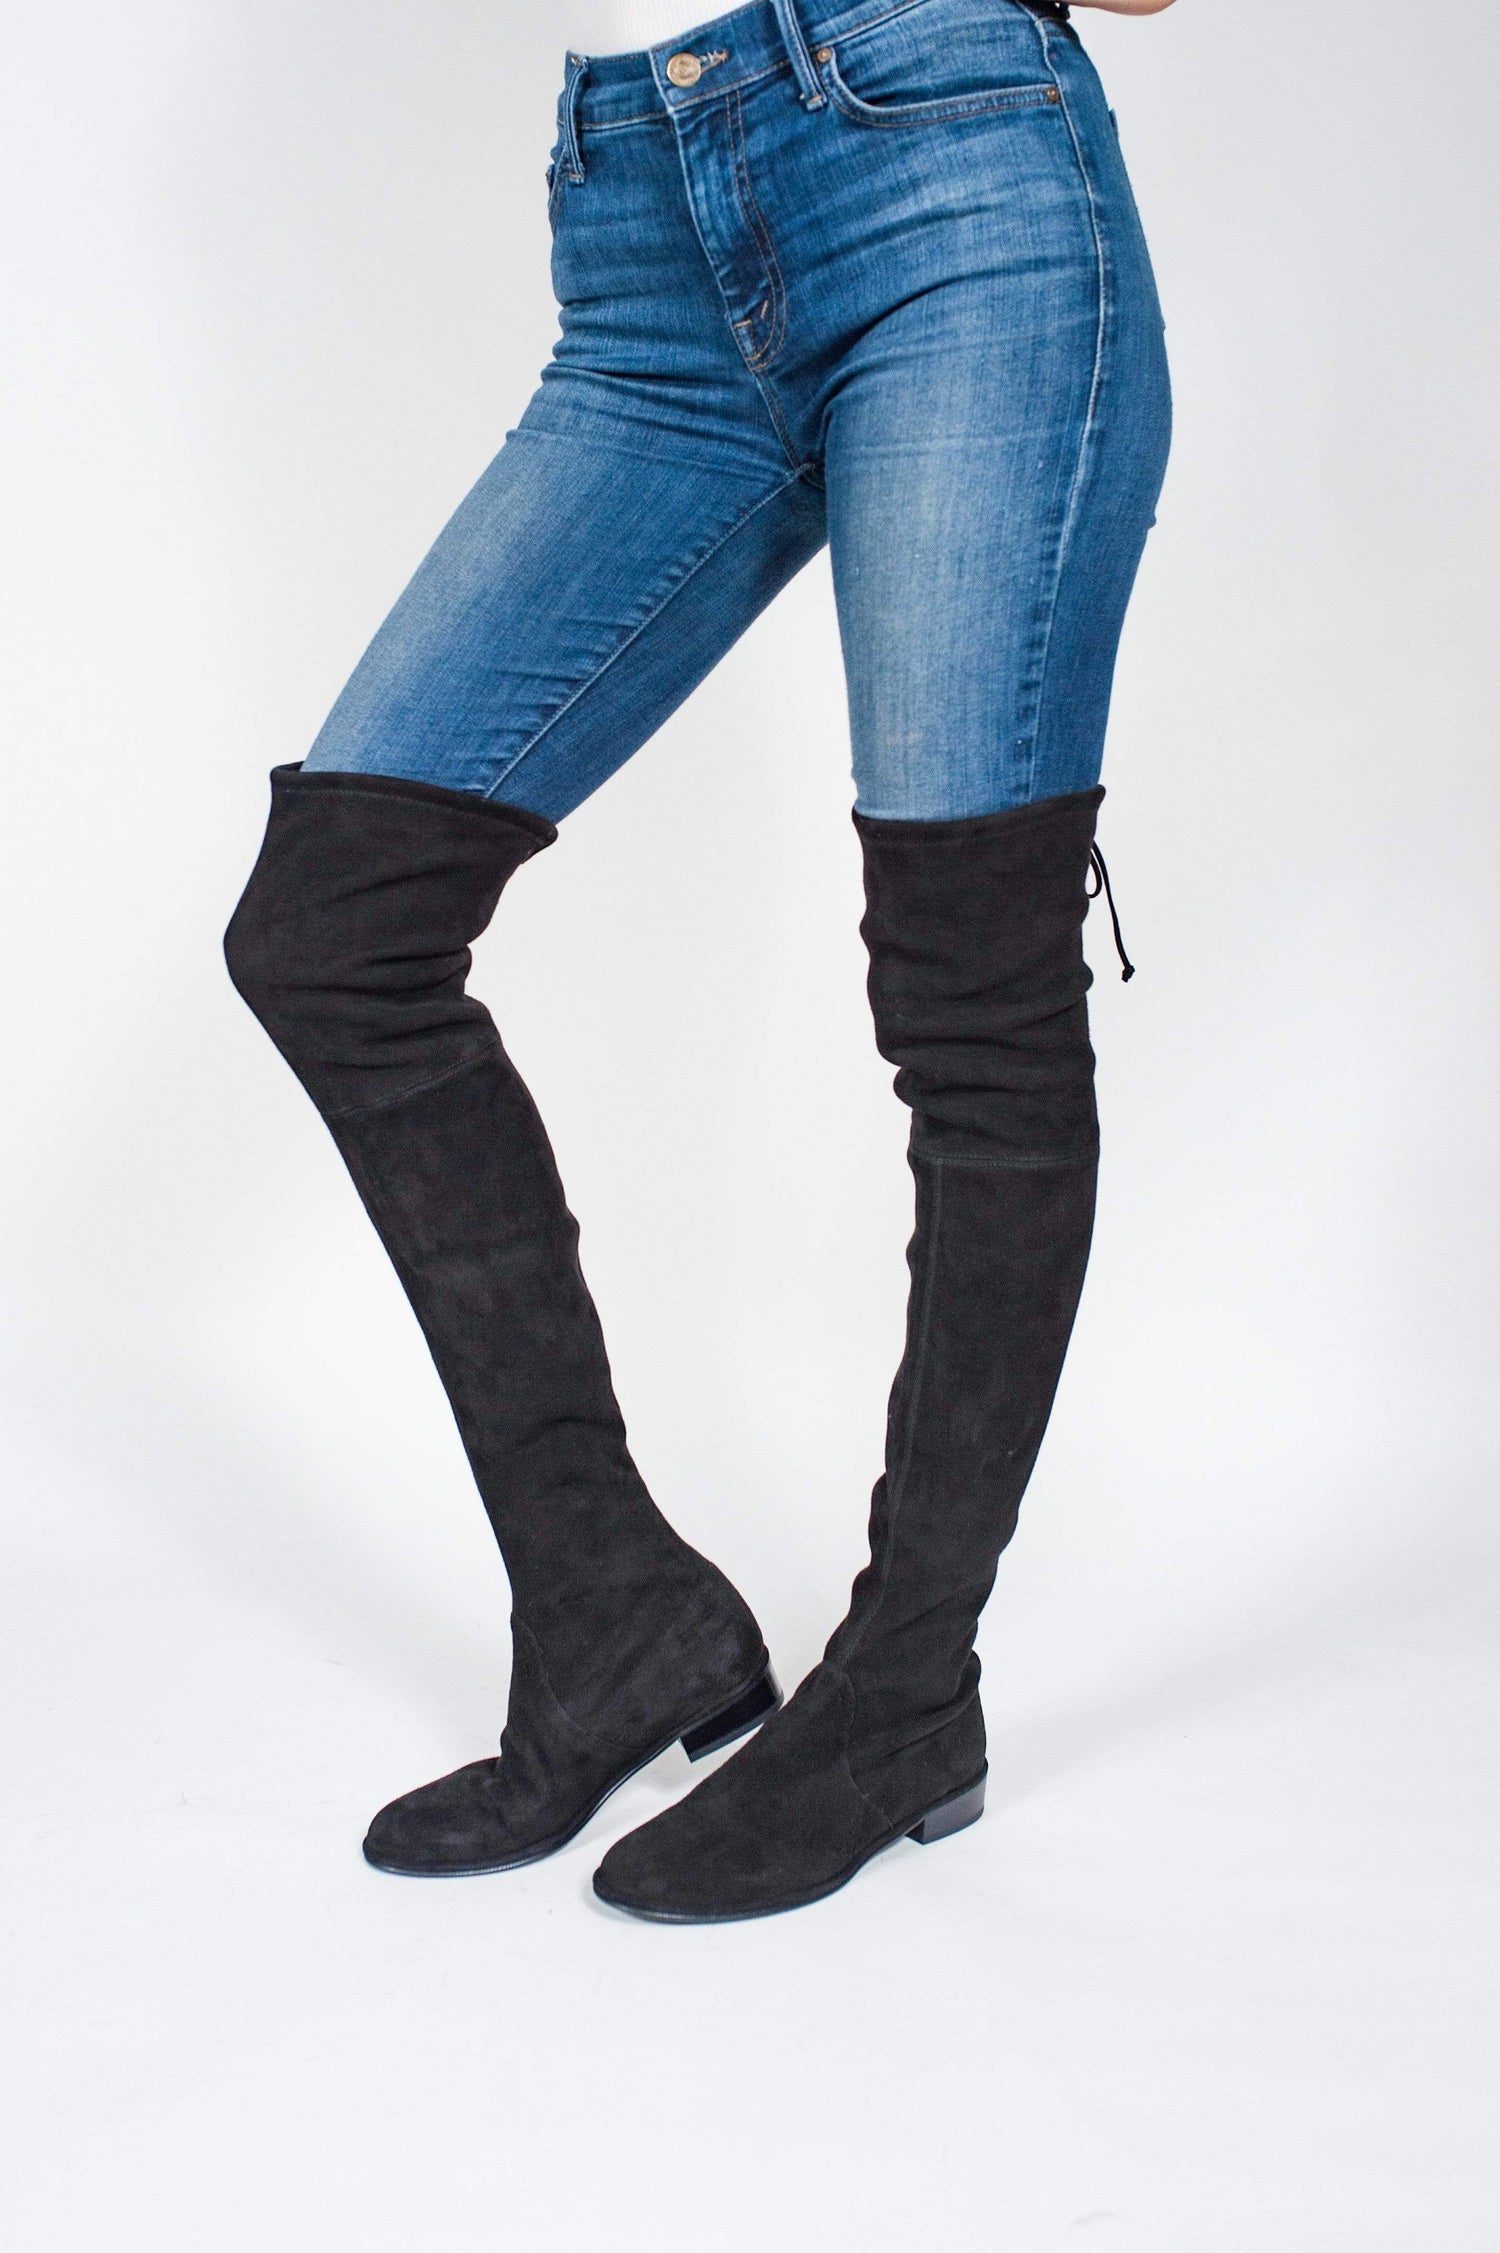 Over-the-Knee Boots — Trendy and Versatile!